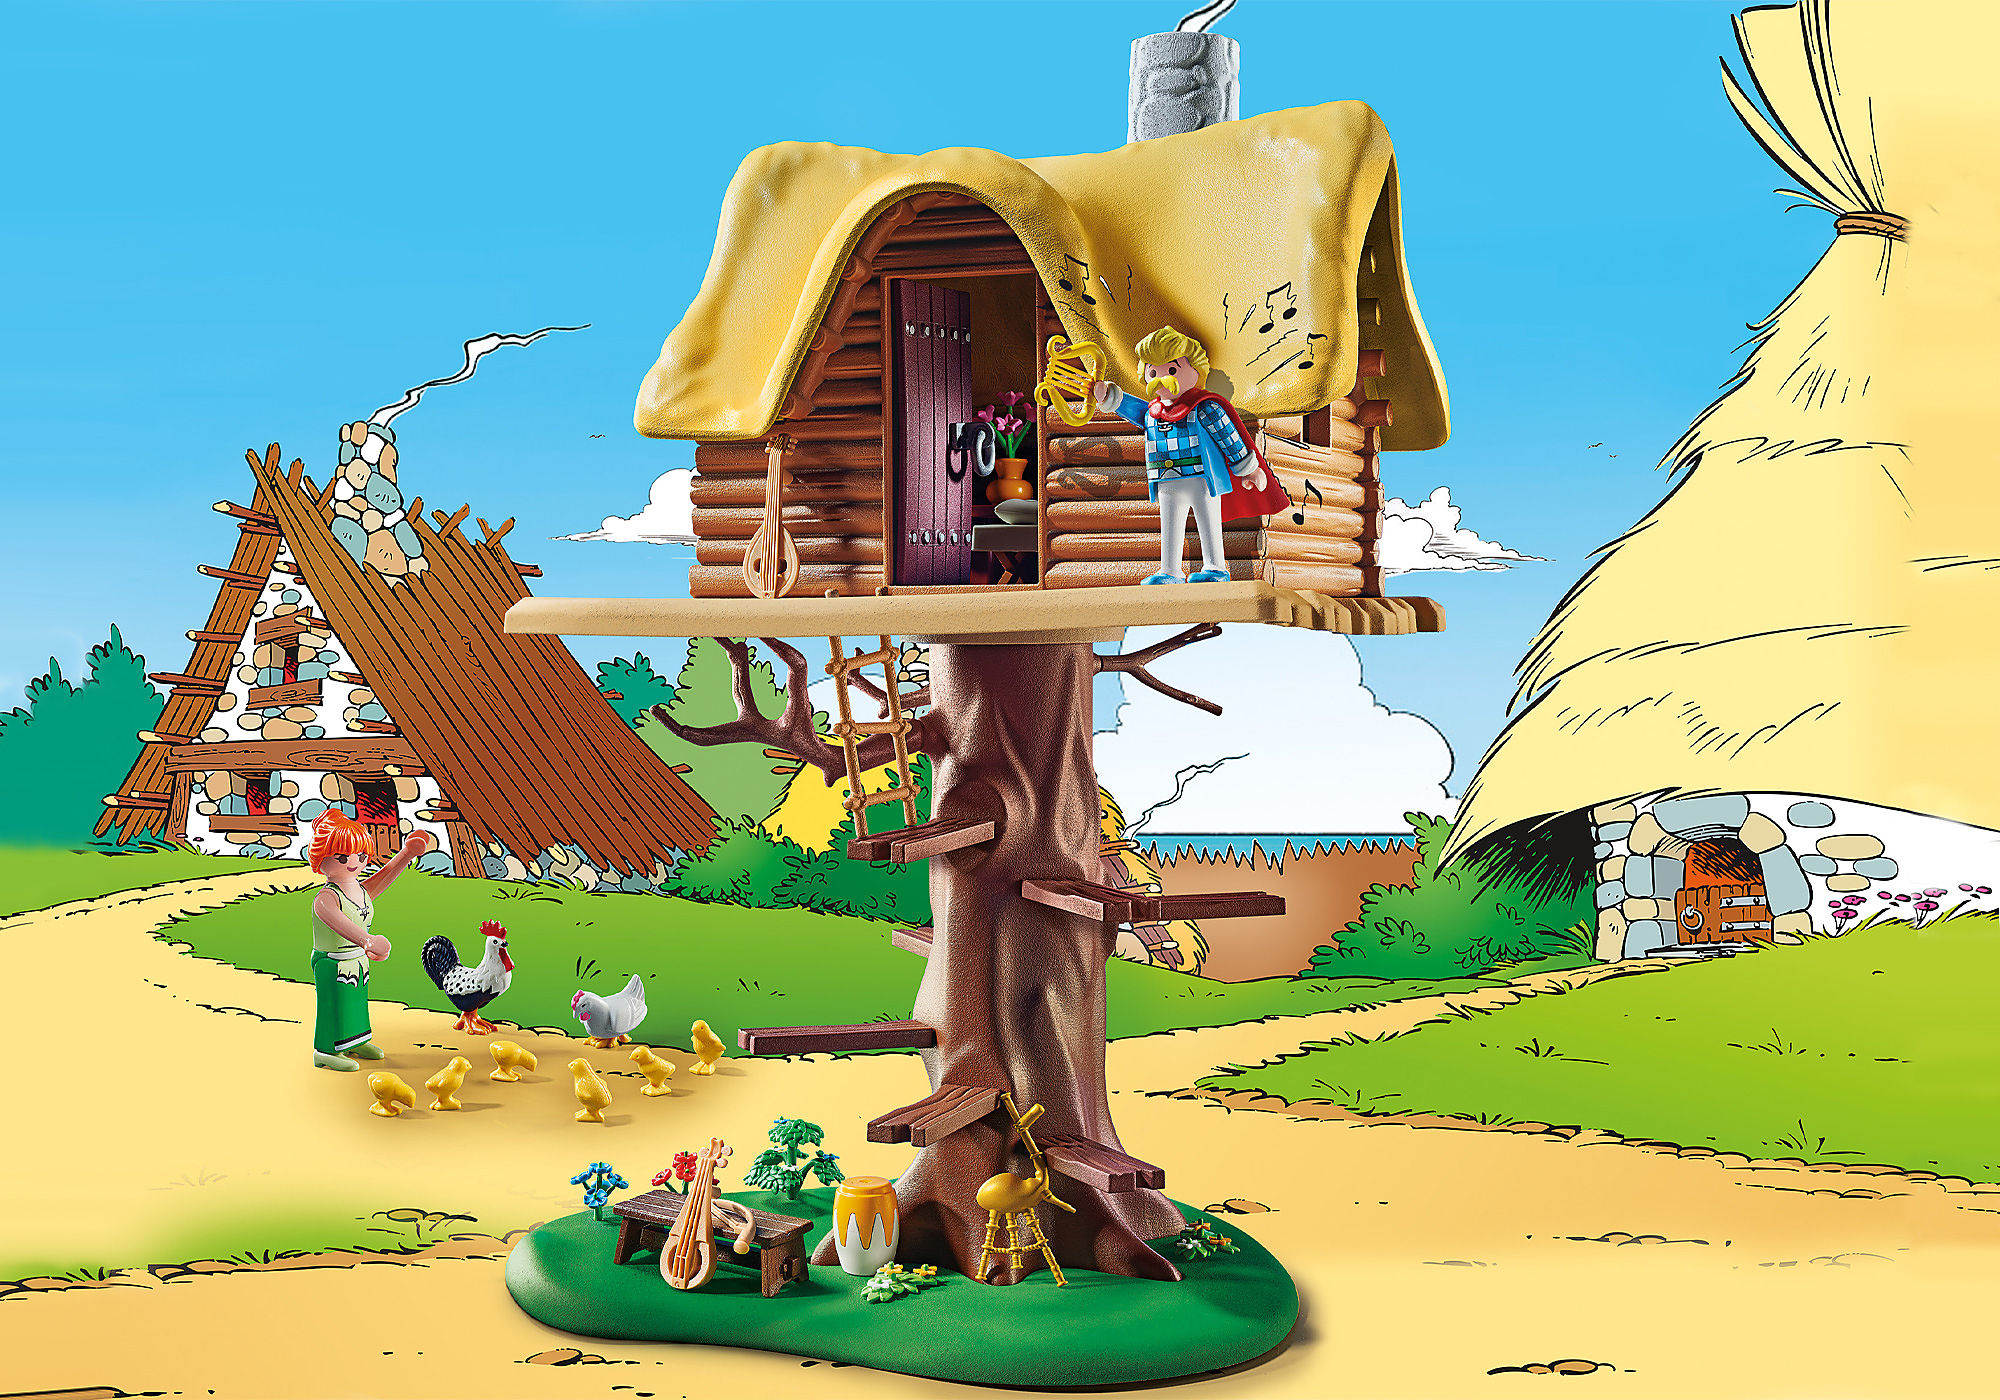 Asterix: Cacofonix with treehouse - 71016